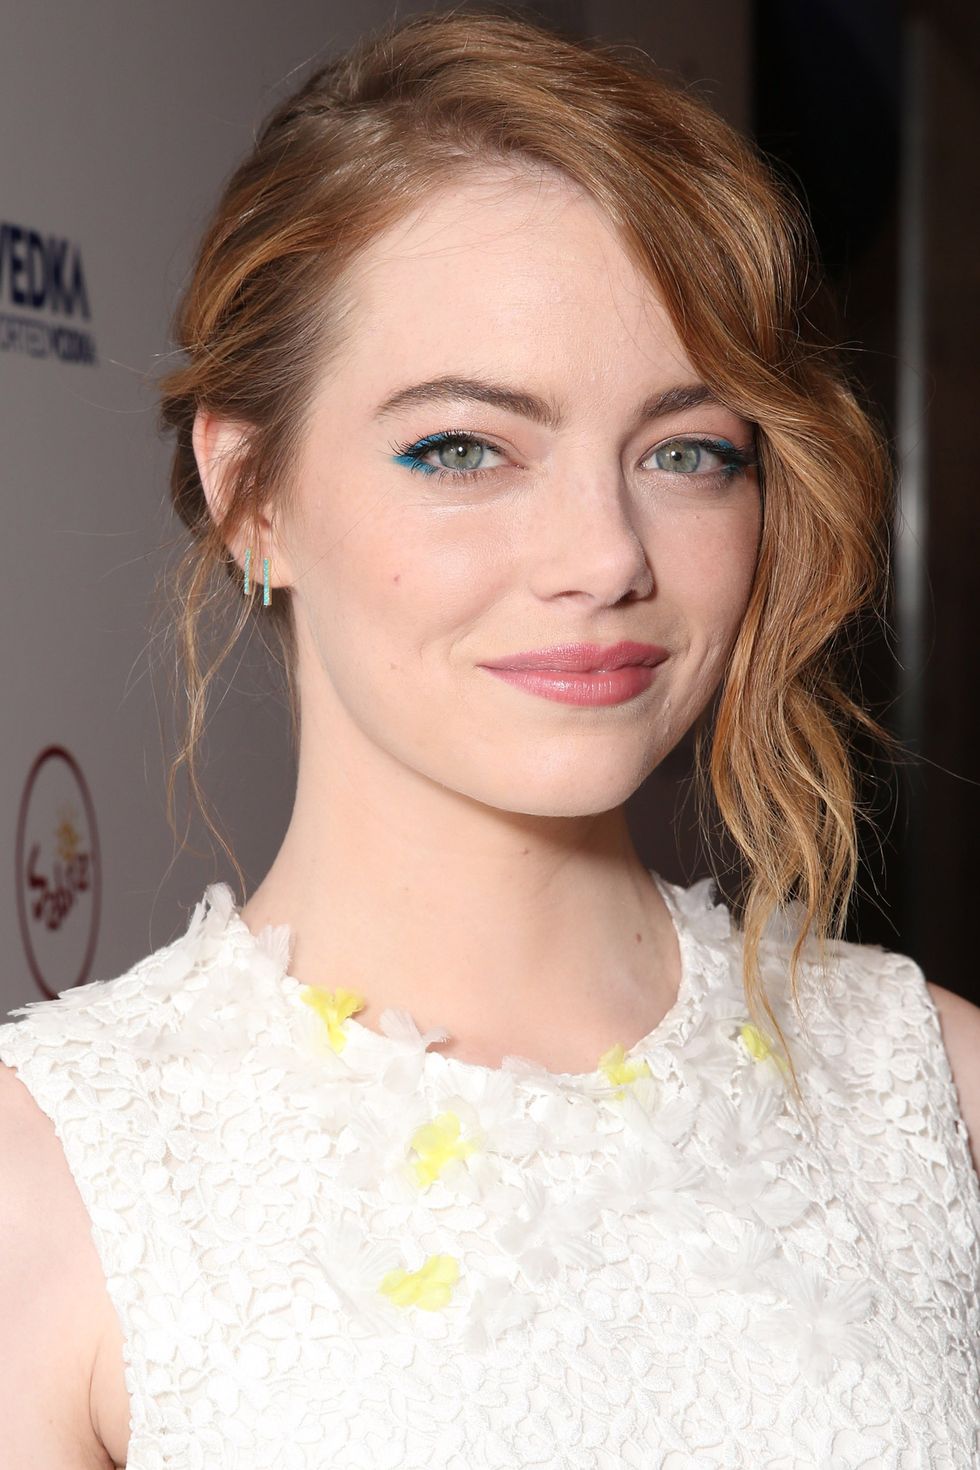 <p>Emma Stone knows the chic way to wear color:&nbsp;ombré&nbsp;strawberry blonde strands, bright blue liner, and touches of yellow on top.<span class="redactor-invisible-space"></span></p>